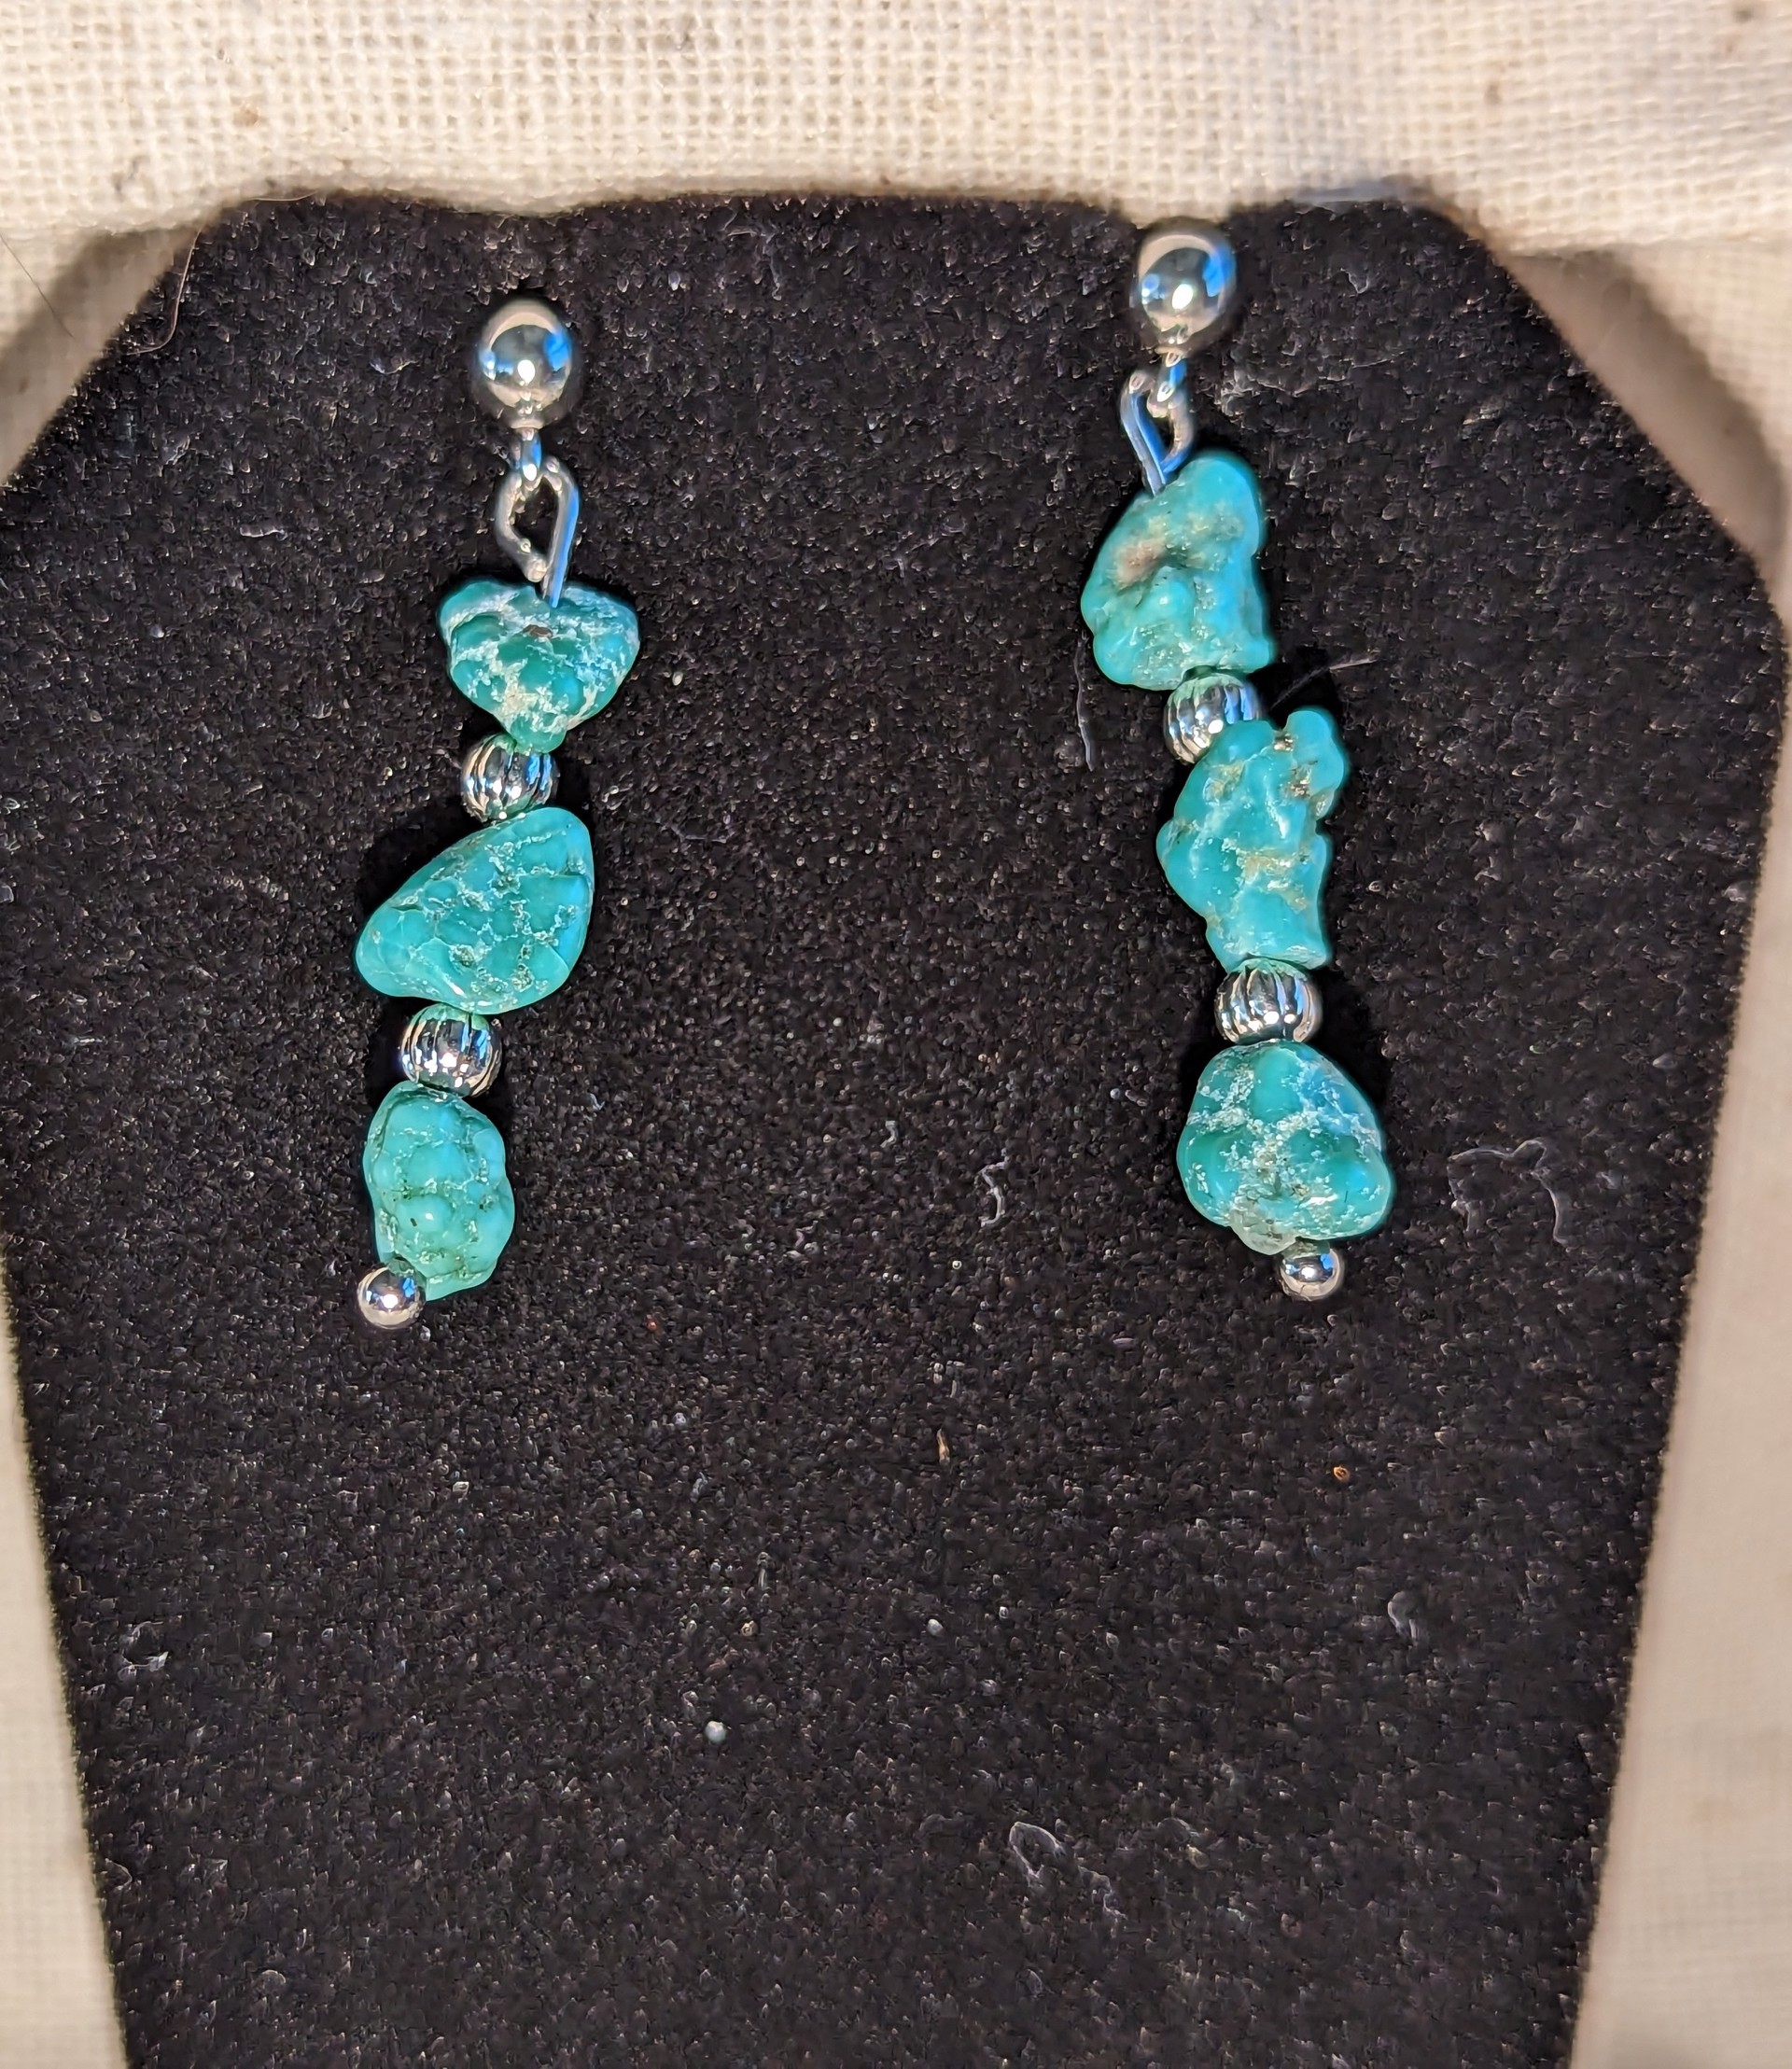 Turquoise Chip earrings by Betty Binder